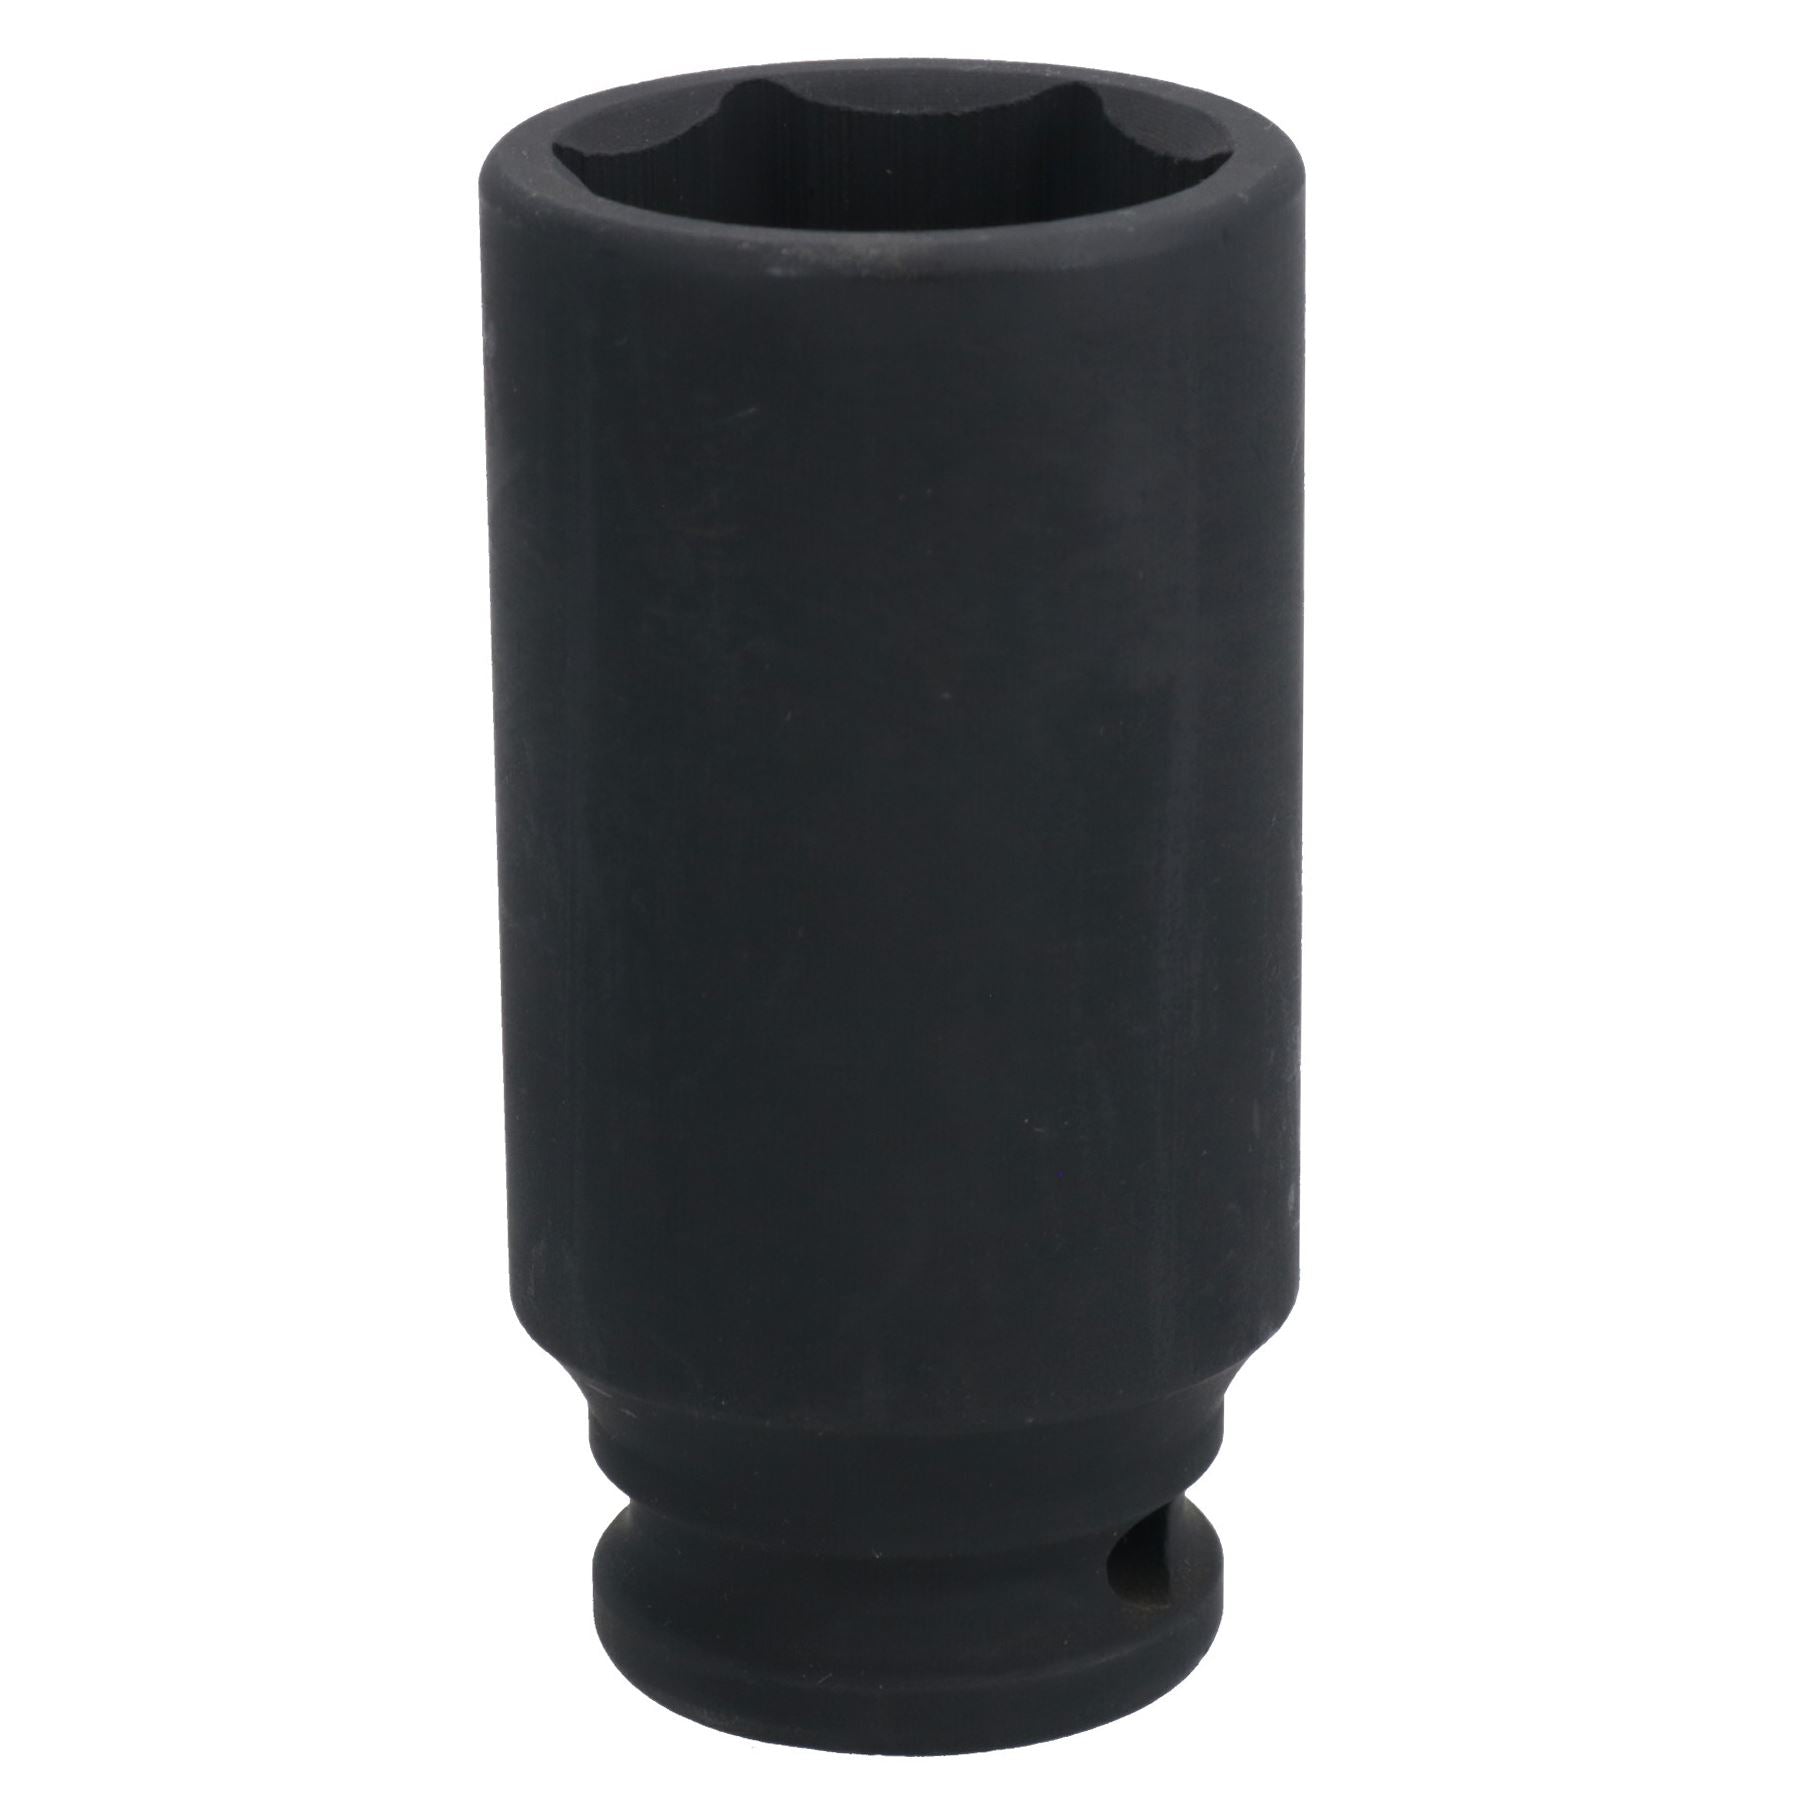 28mm 1/2in Drive Double Deep Impact Impacted Socket 6 Sided Single Hex